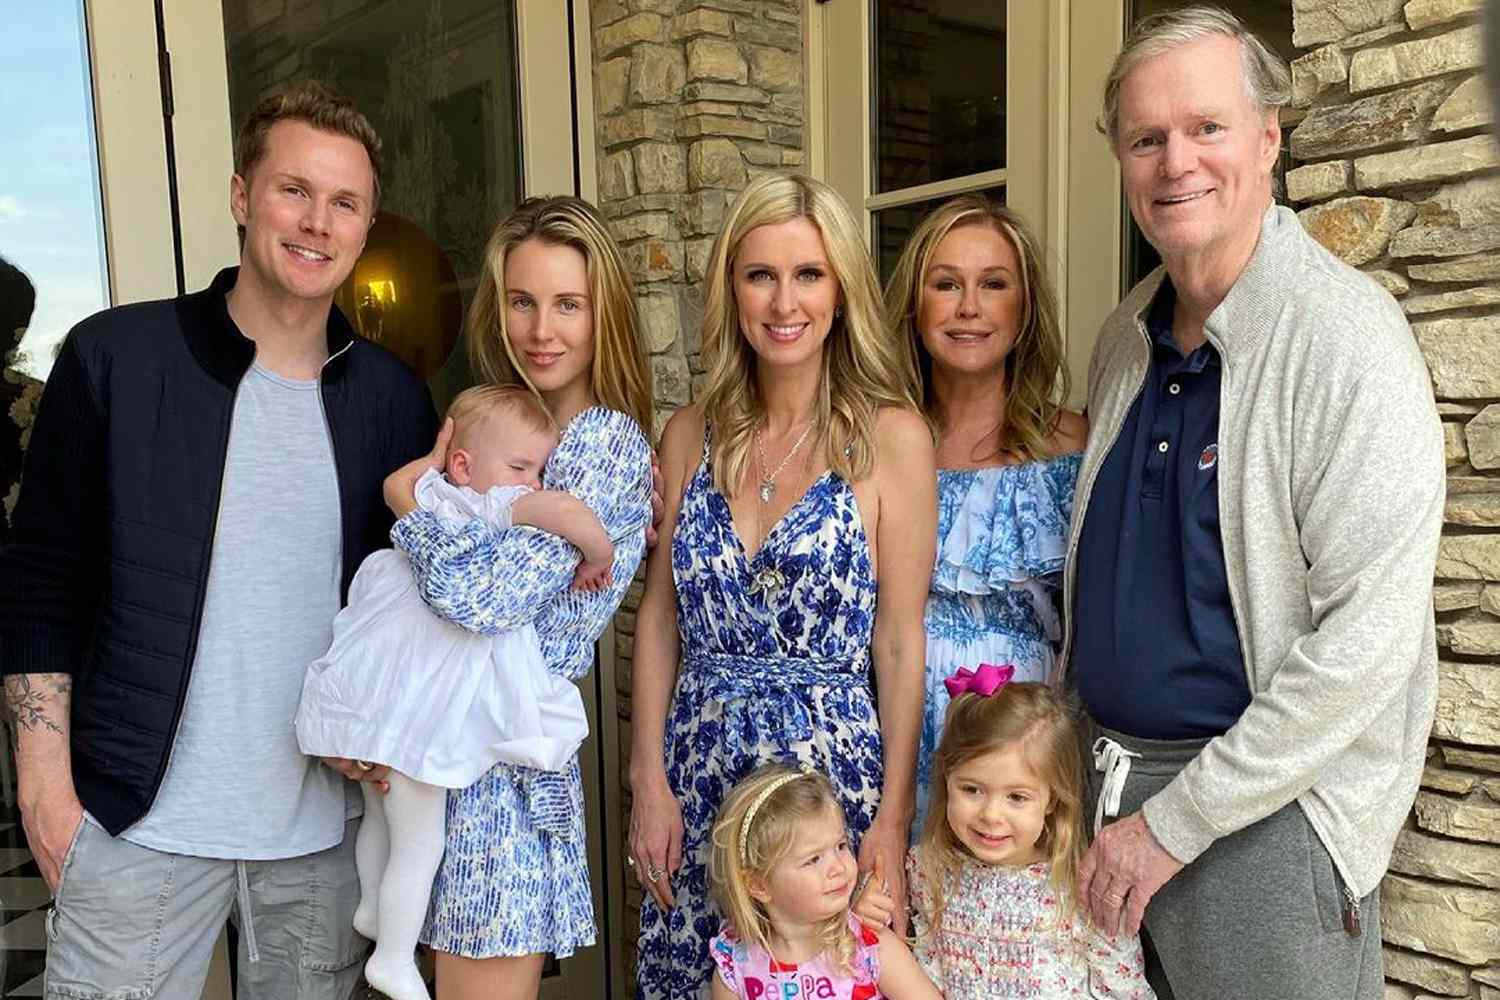 Kathy Hilton Loves Hosting Her Grandkids for Slumber Parties: 'We Make Feather Beds on the Floor' (Exclusive)